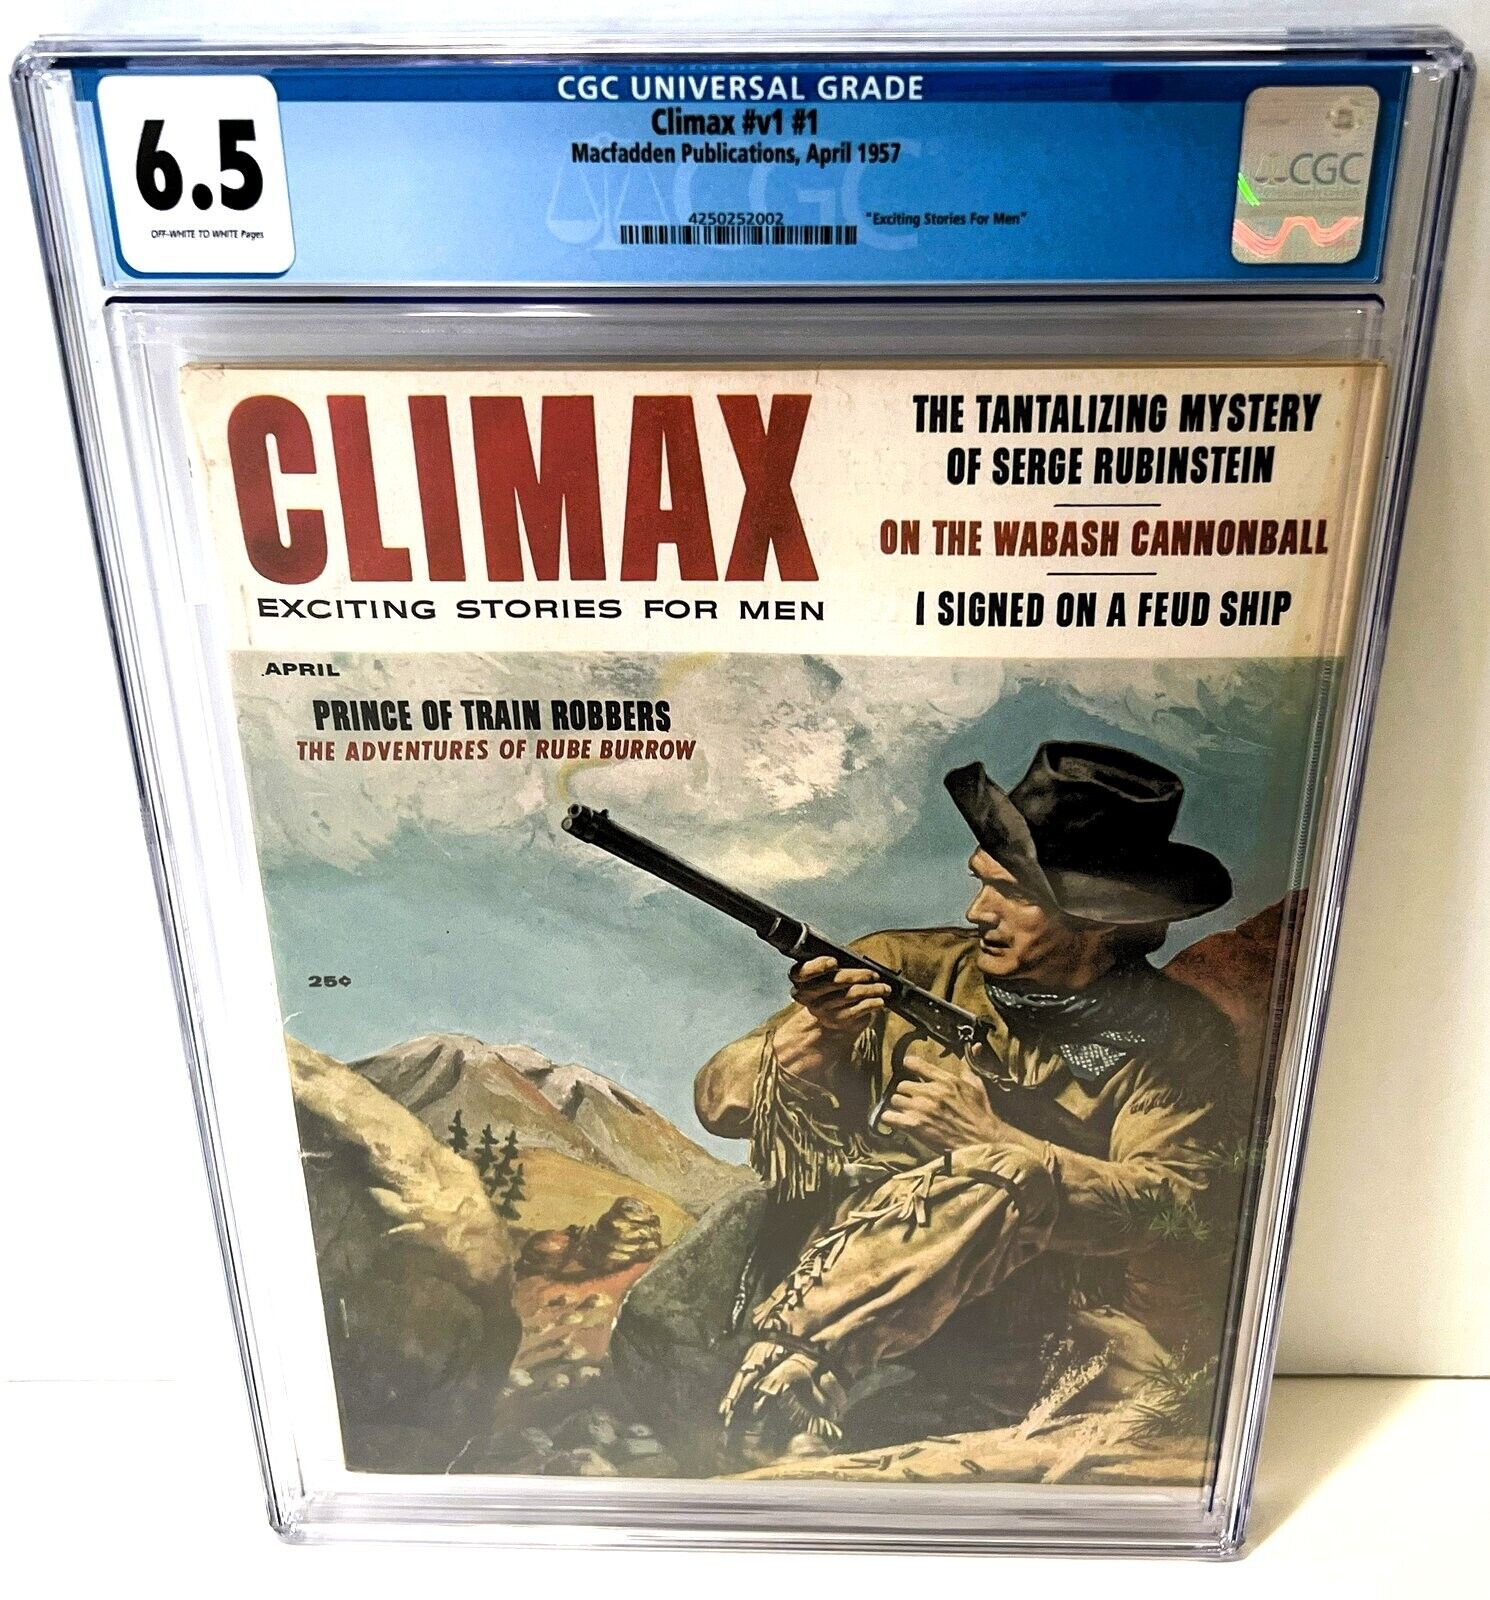 CLIMAX MAG FOR MEN 1957 VOLUME 1 NUMBER 1  CGC 6.5 #1 MAGAZINE ISSUE RUBE BURROW